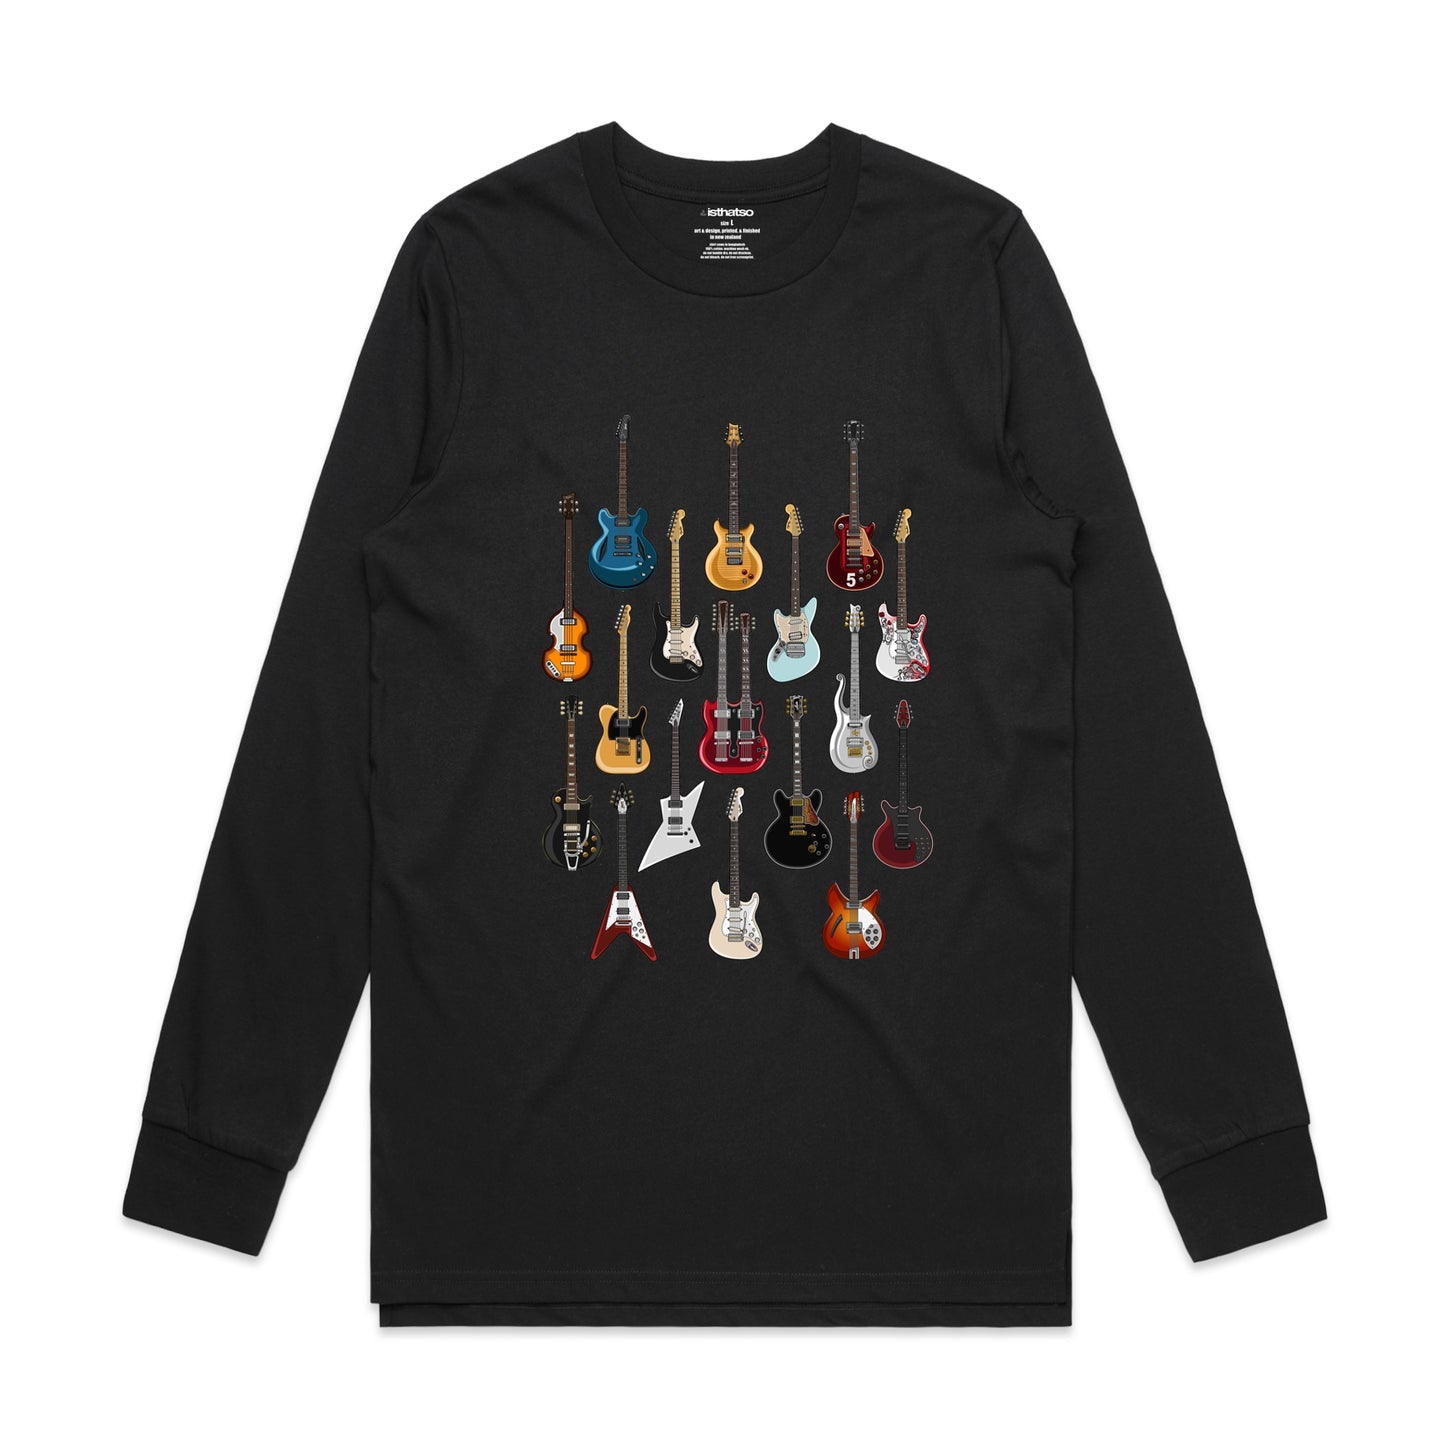 Isthatso Cotton Graphic Long Sleeved Tee -  Famous Guitars